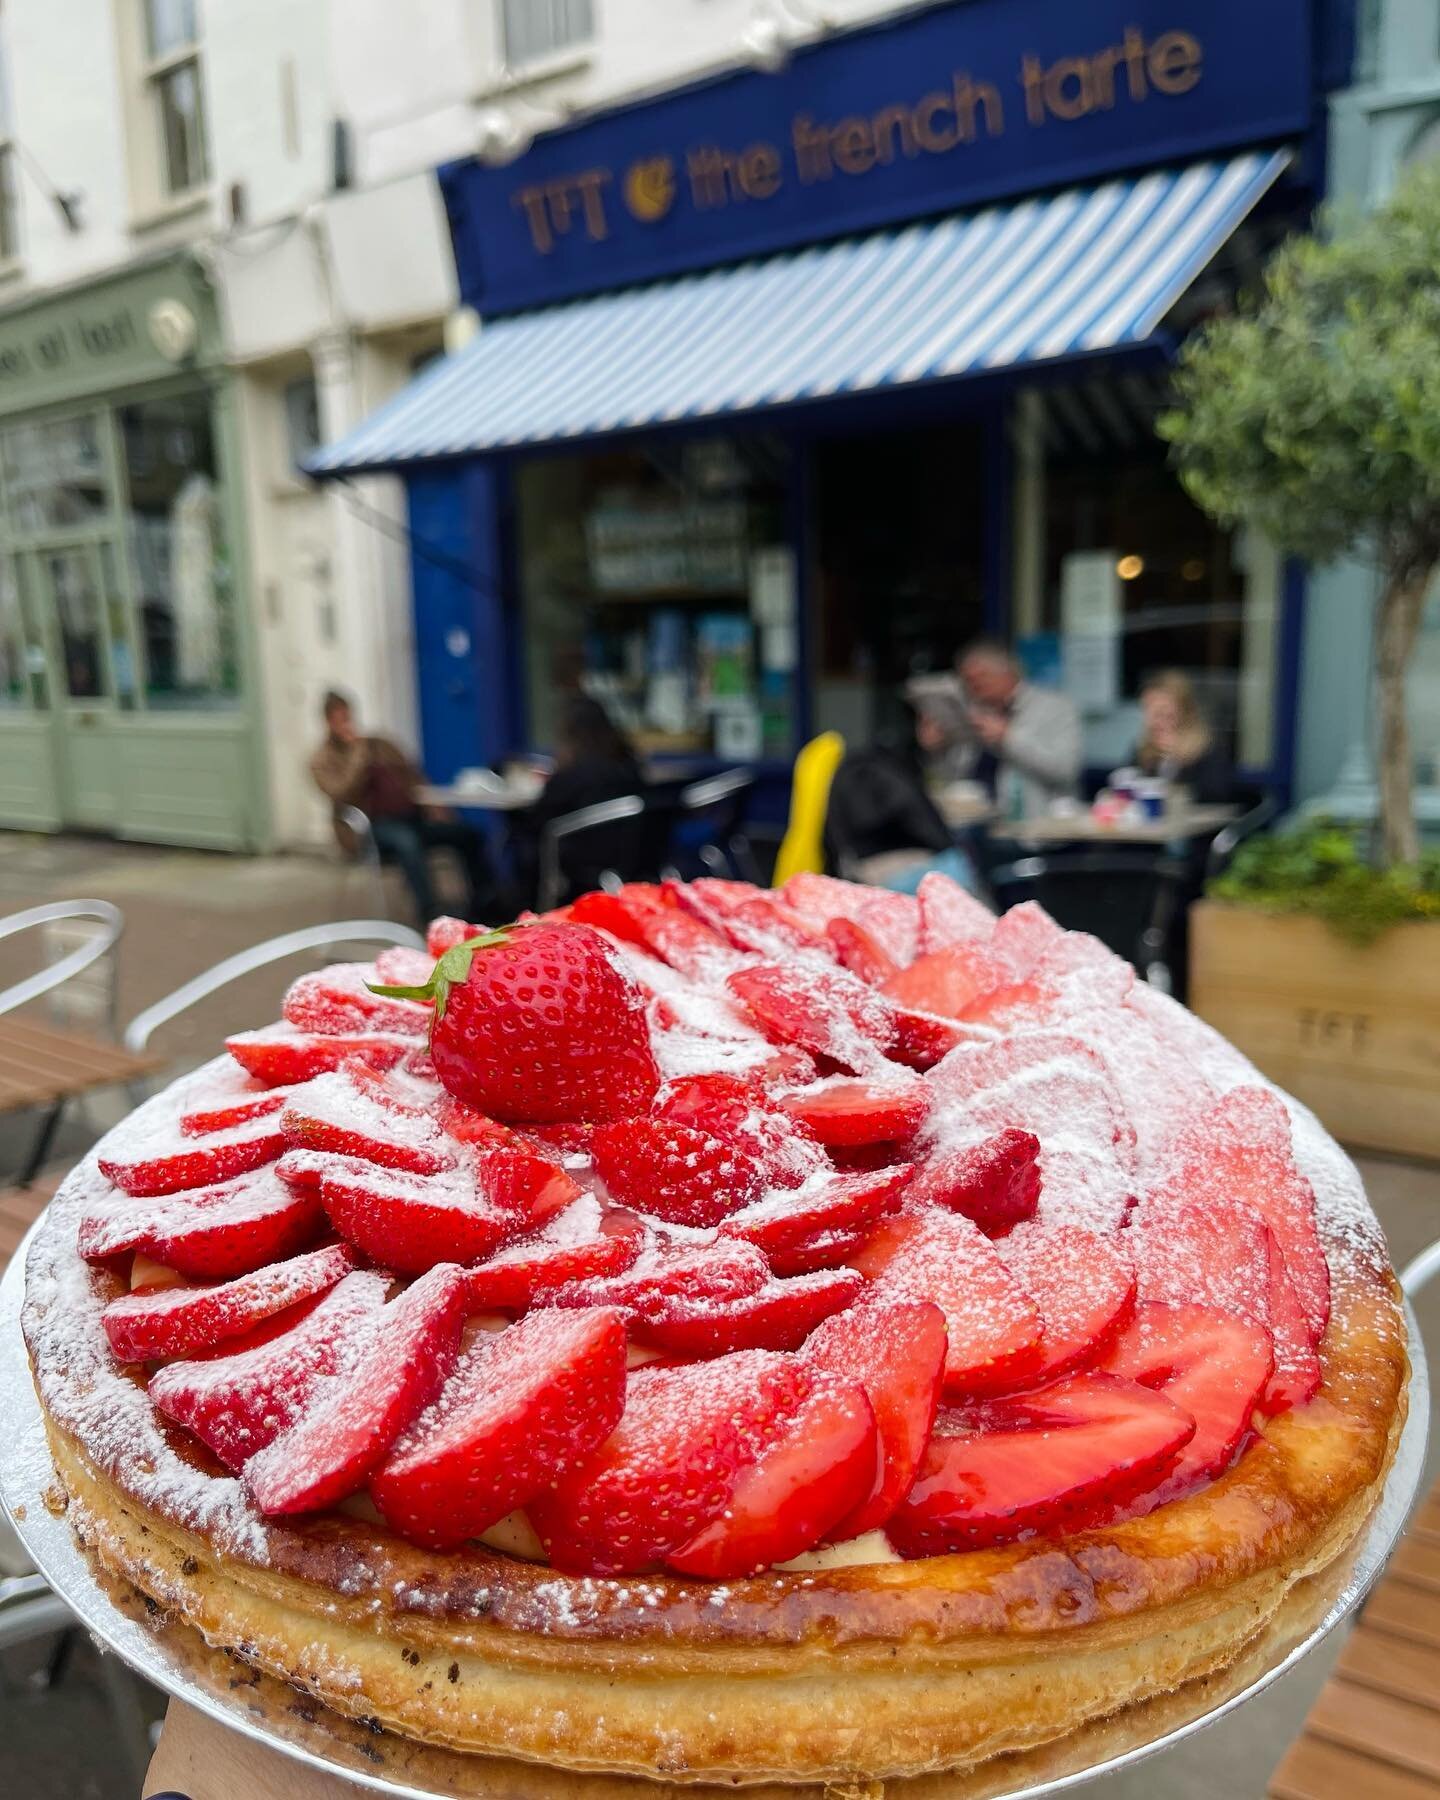 WOW WOW WOW this looks so yummy 
Strawberry Tarte available today!  Happy Friday everyone! 
&bull;
&bull;
&bull;
#happyfriday #itsfriday #weekend #may2023 #strawberrytarte #strawberries🍓 #strwawberrydessert #strawberrytartelover #strawberrytart #des